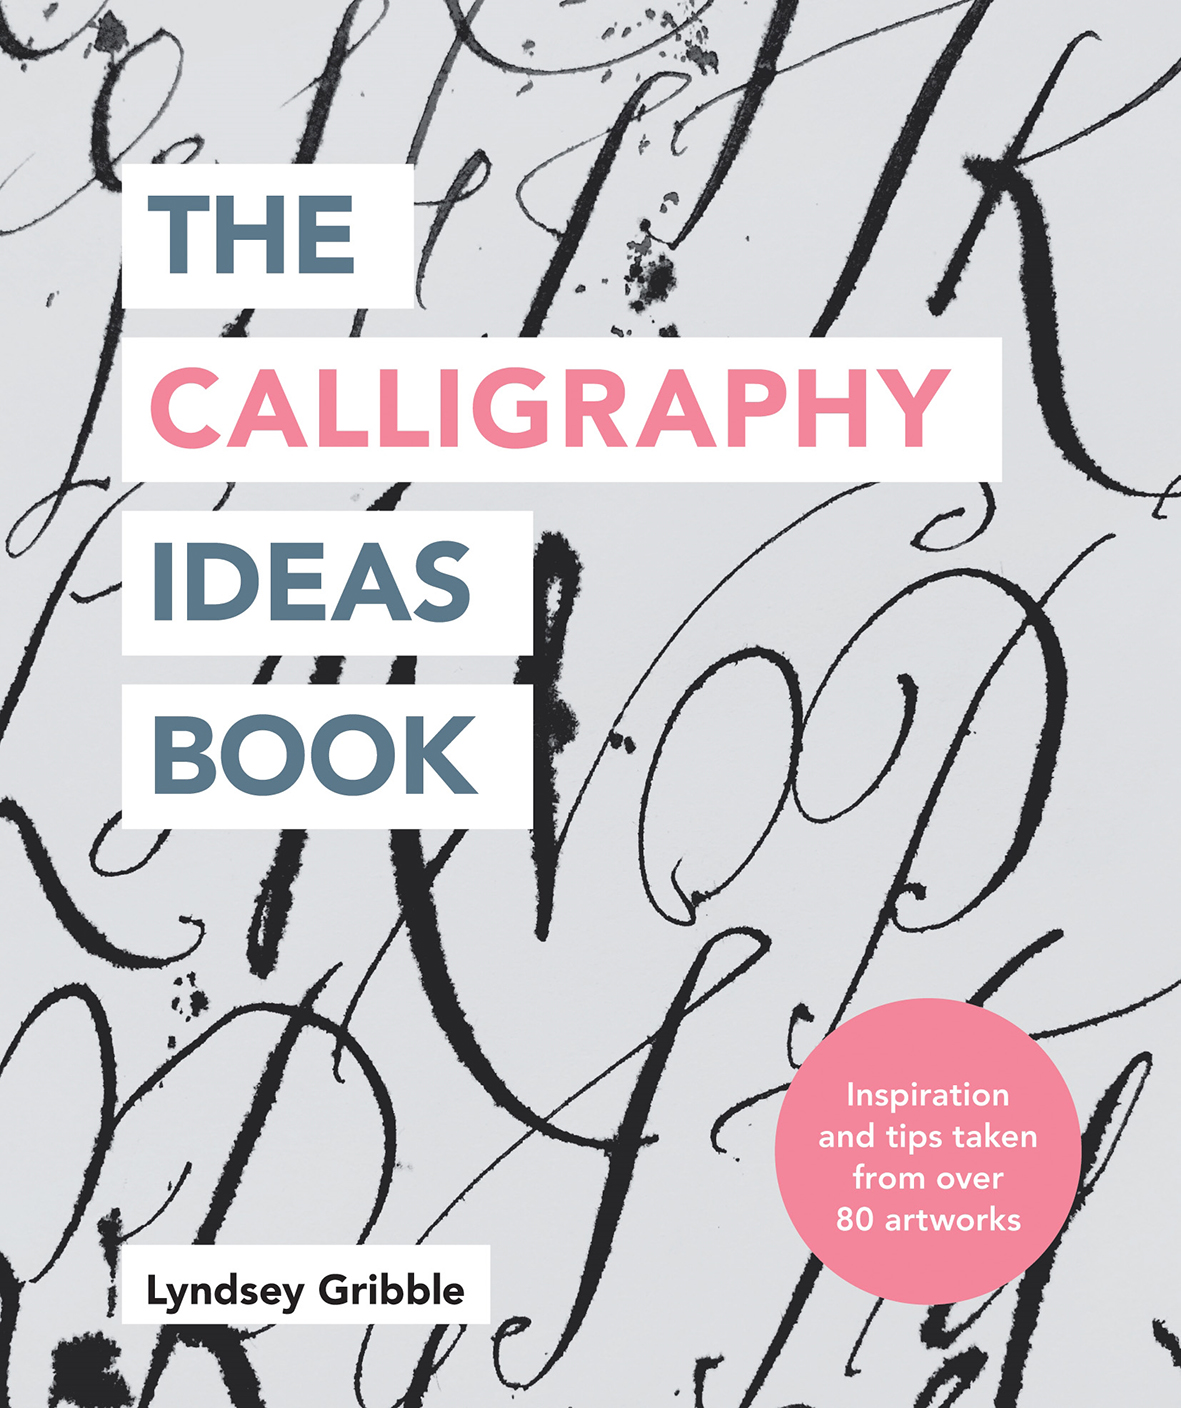 The Calligraphy Ideas Book | Lyndsey Gribble